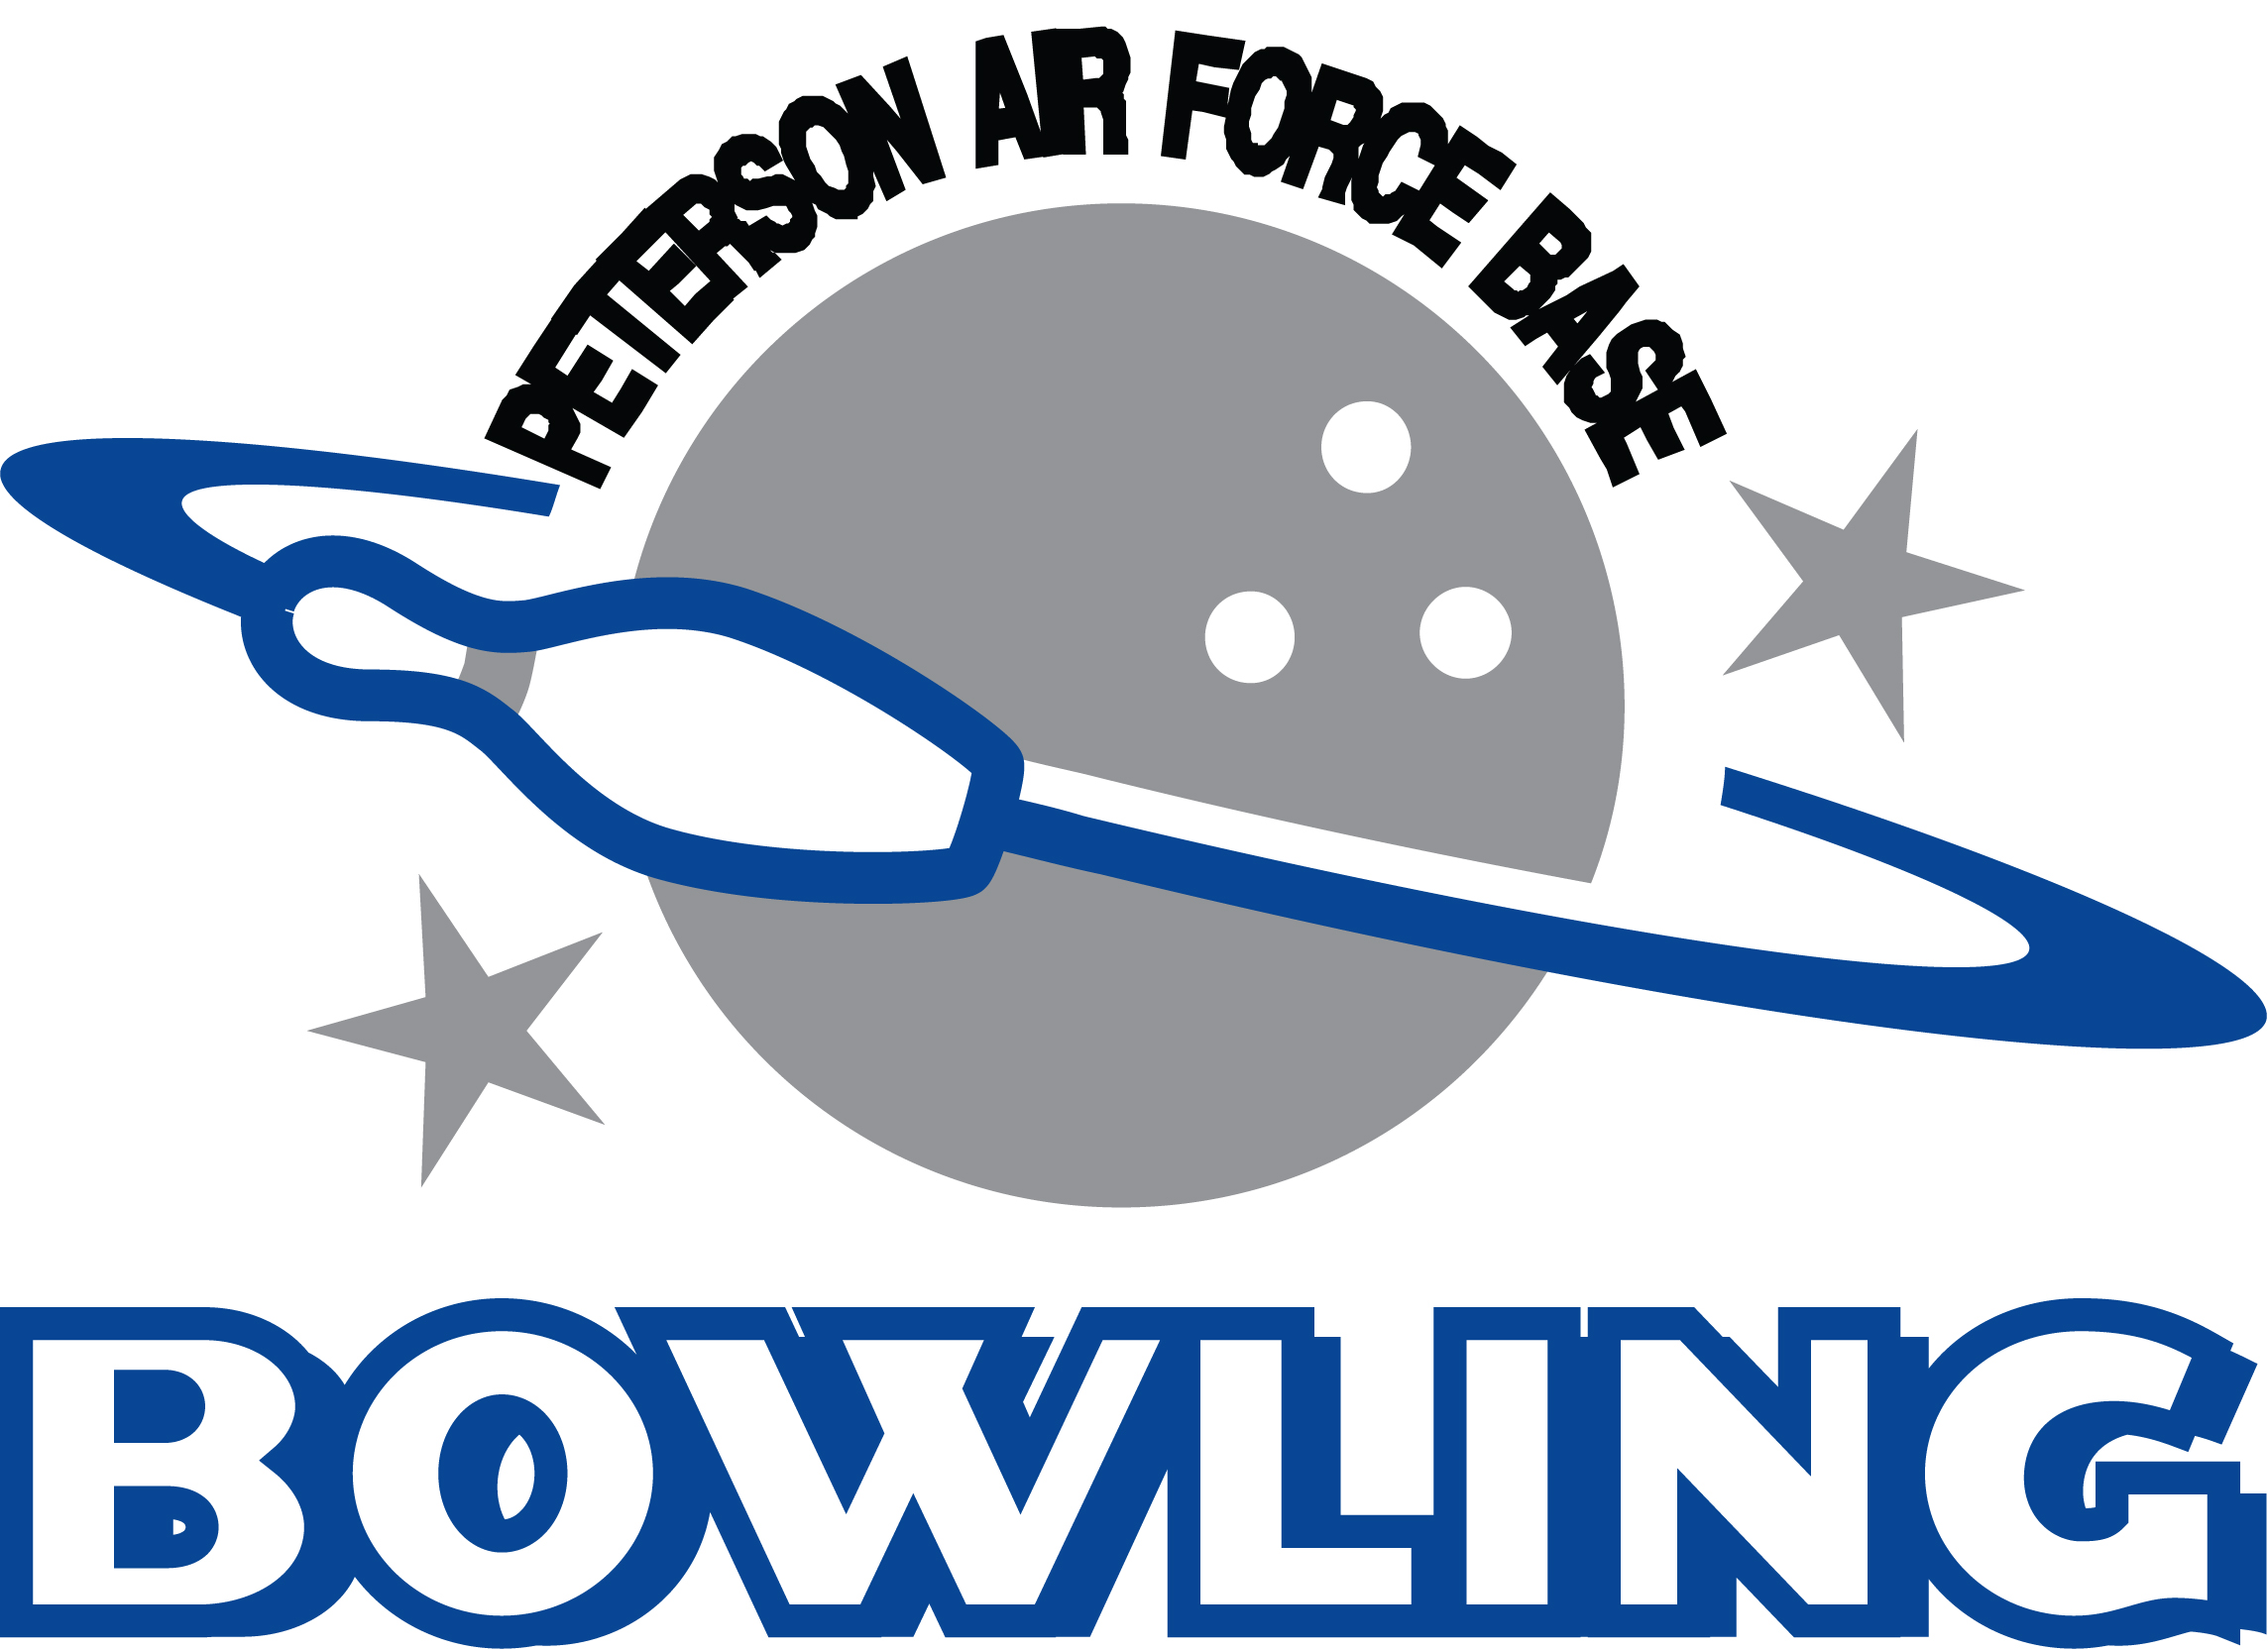 Bowling Center installs new equipment > Peterson and Schriever Space ...